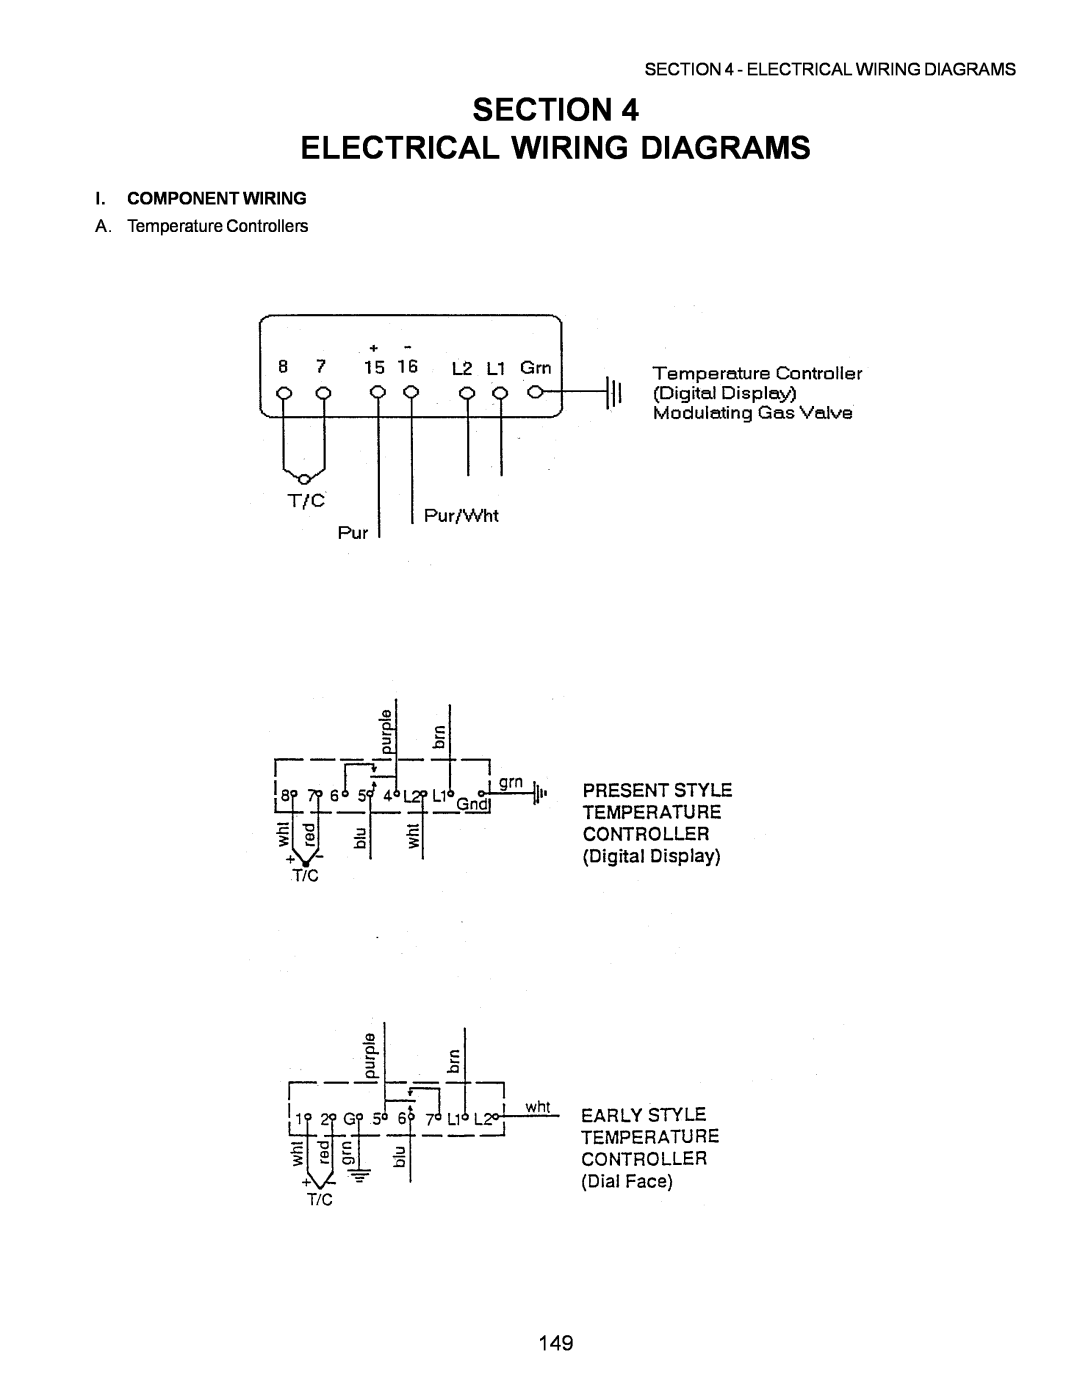 Middleby Marshall PS570, PS360, PS200, PS555, PS220, PS224 PS310 manual Section Electrical Wiring Diagrams, I. Component Wiring 